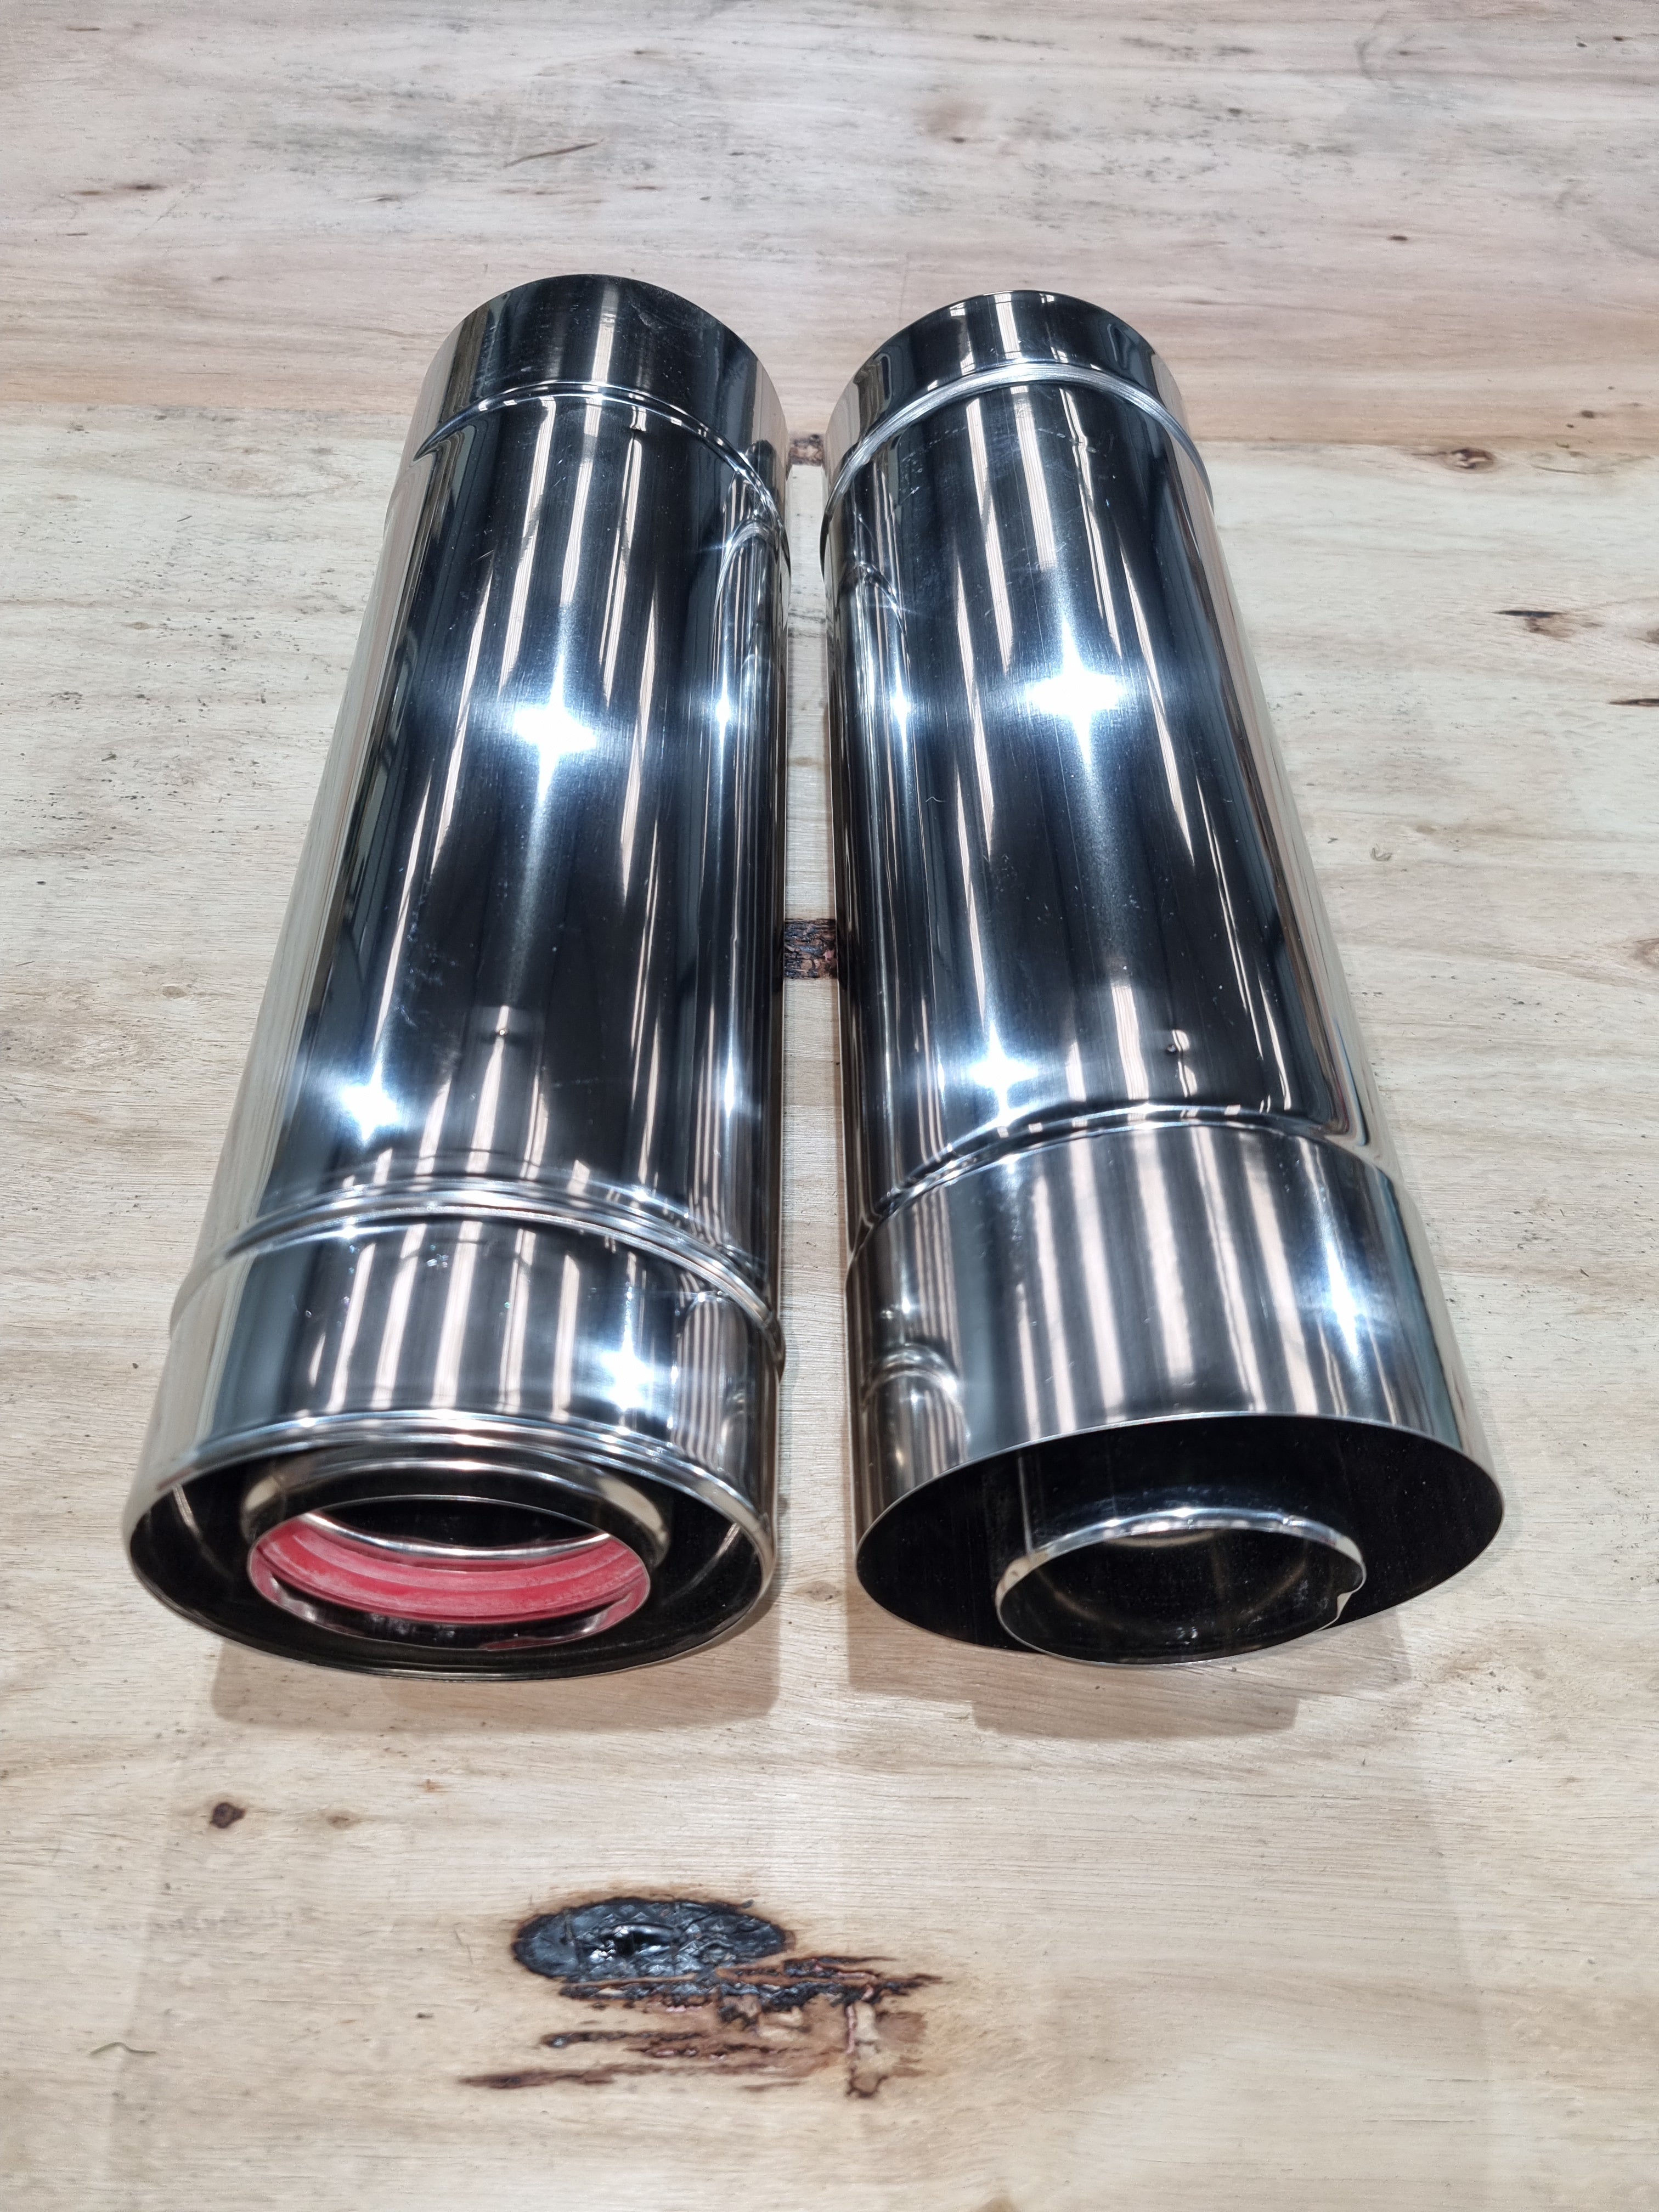 60mm Diameter - Double Wall Stainless Steel Stove Flue Pipe Connections